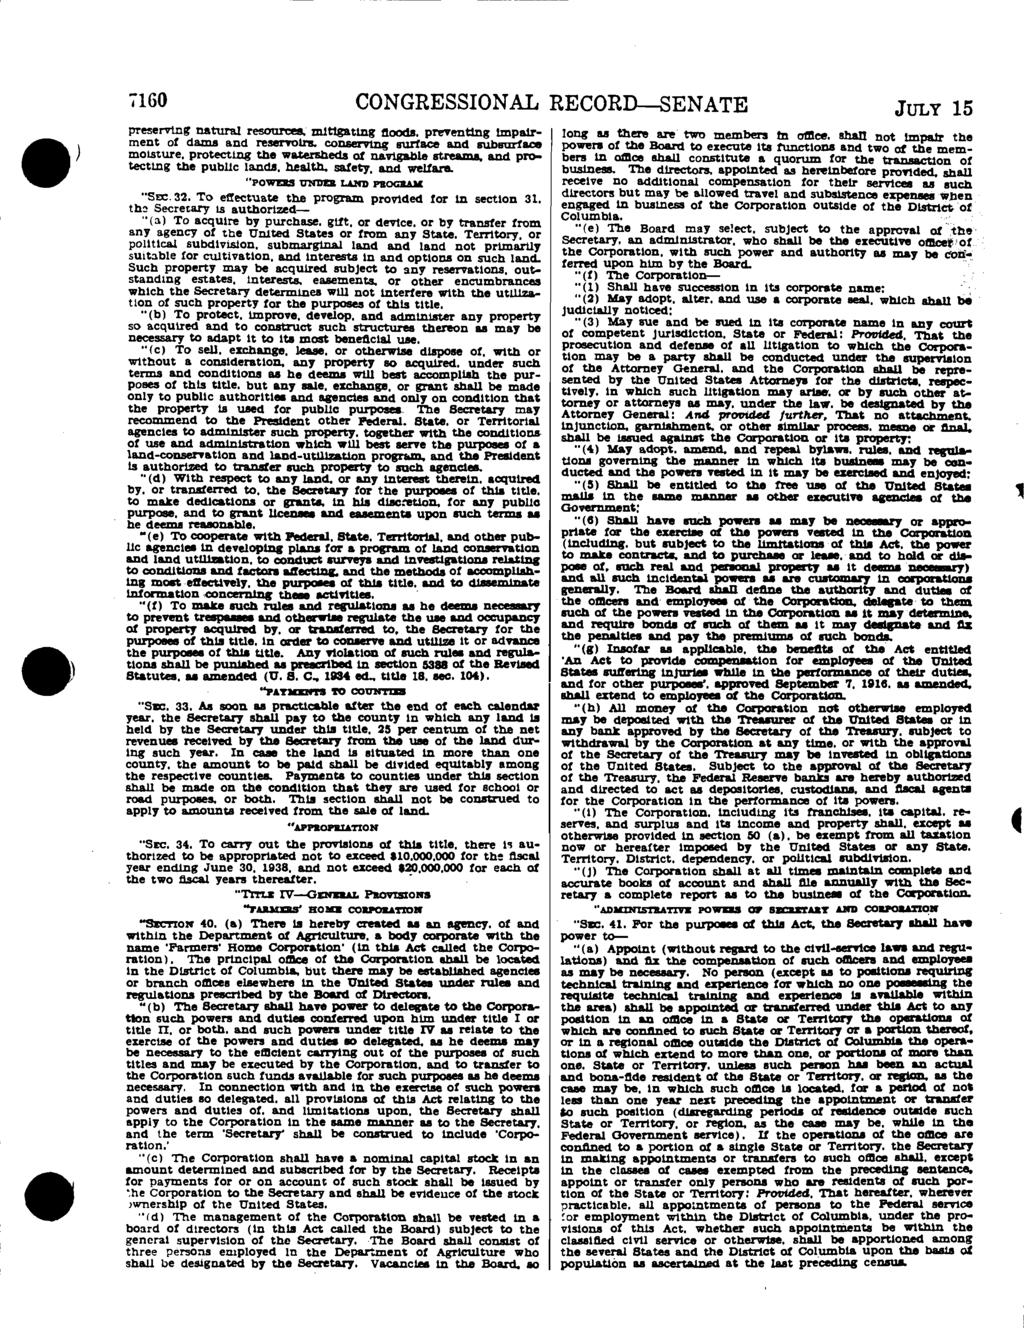 S 7160 CONGRESSIONAL RECORD-SENATE JULY 15 preserving natural resources, mitigating floods.